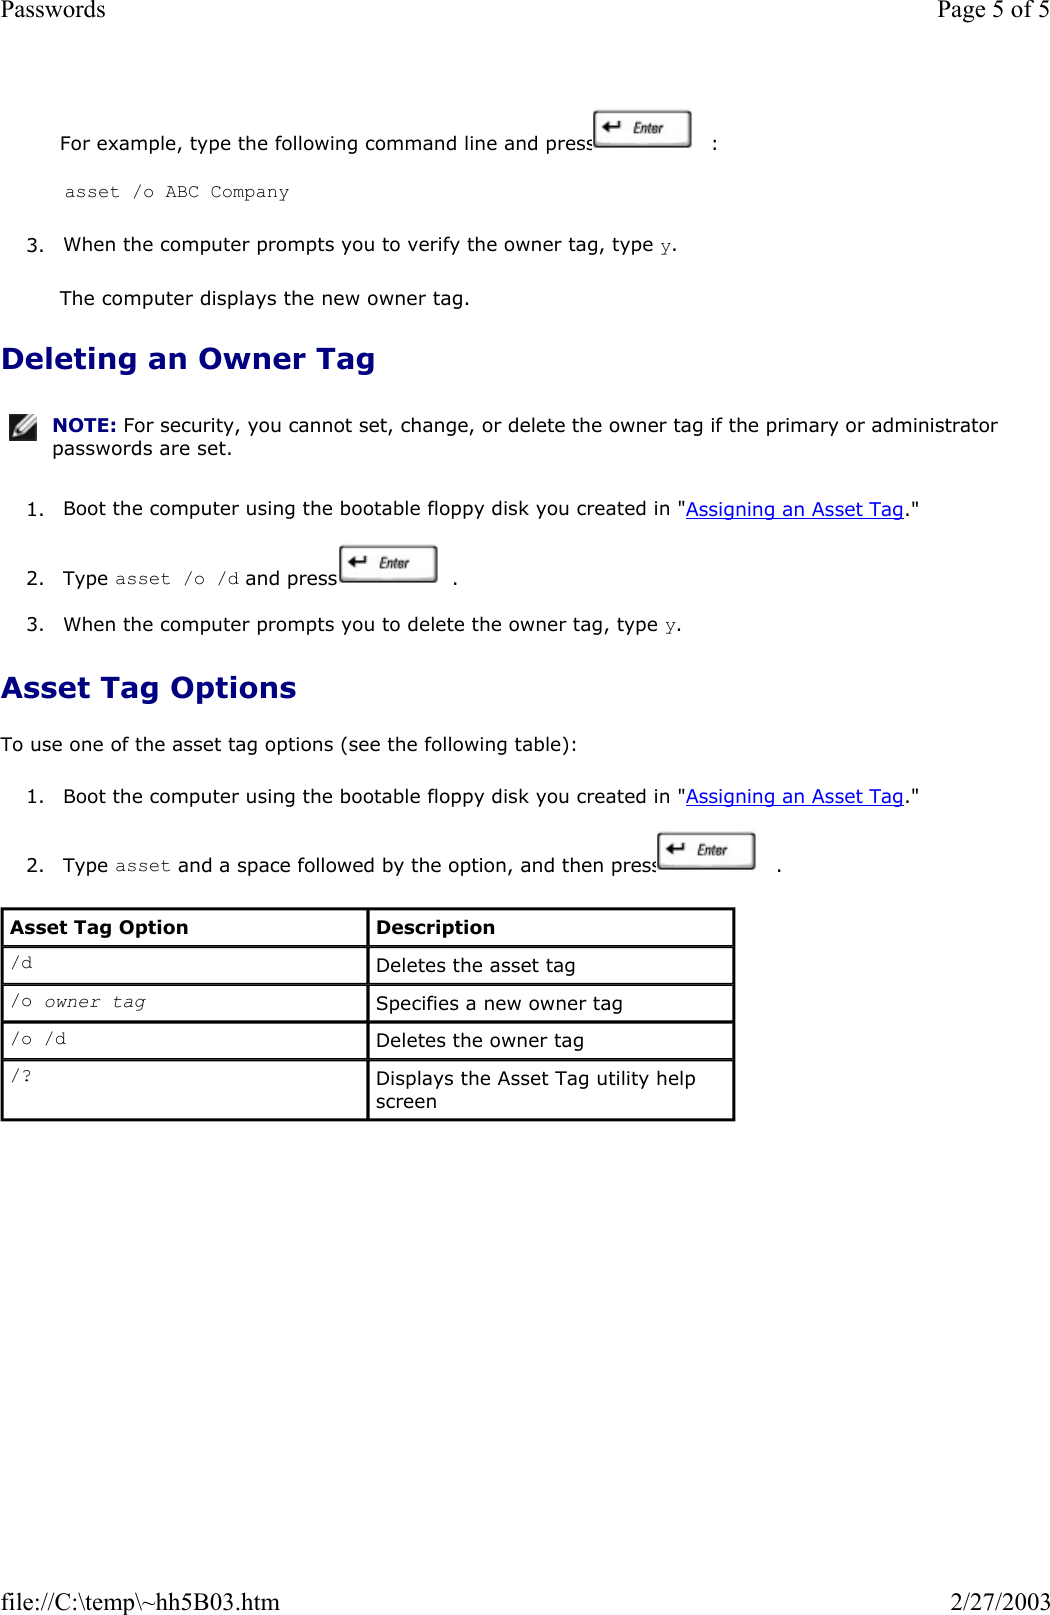 For example, type the following command line and press   : asset /o ABC Company  3. When the computer prompts you to verify the owner tag, type y.   The computer displays the new owner tag. Deleting an Owner Tag 1. Boot the computer using the bootable floppy disk you created in &quot;Assigning an Asset Tag.&quot;   2. Type asset /o /d and press   .  3. When the computer prompts you to delete the owner tag, type y.   Asset Tag Options To use one of the asset tag options (see the following table): 1. Boot the computer using the bootable floppy disk you created in &quot;Assigning an Asset Tag.&quot;  2. Type asset and a space followed by the option, and then press   .  NOTE: For security, you cannot set, change, or delete the owner tag if the primary or administrator passwords are set.Asset Tag Option  Description /d   Deletes the asset tag /o owner tag  Specifies a new owner tag /o /d   Deletes the owner tag /?   Displays the Asset Tag utility help screen Page 5 of 5Passwords2/27/2003file://C:\temp\~hh5B03.htm